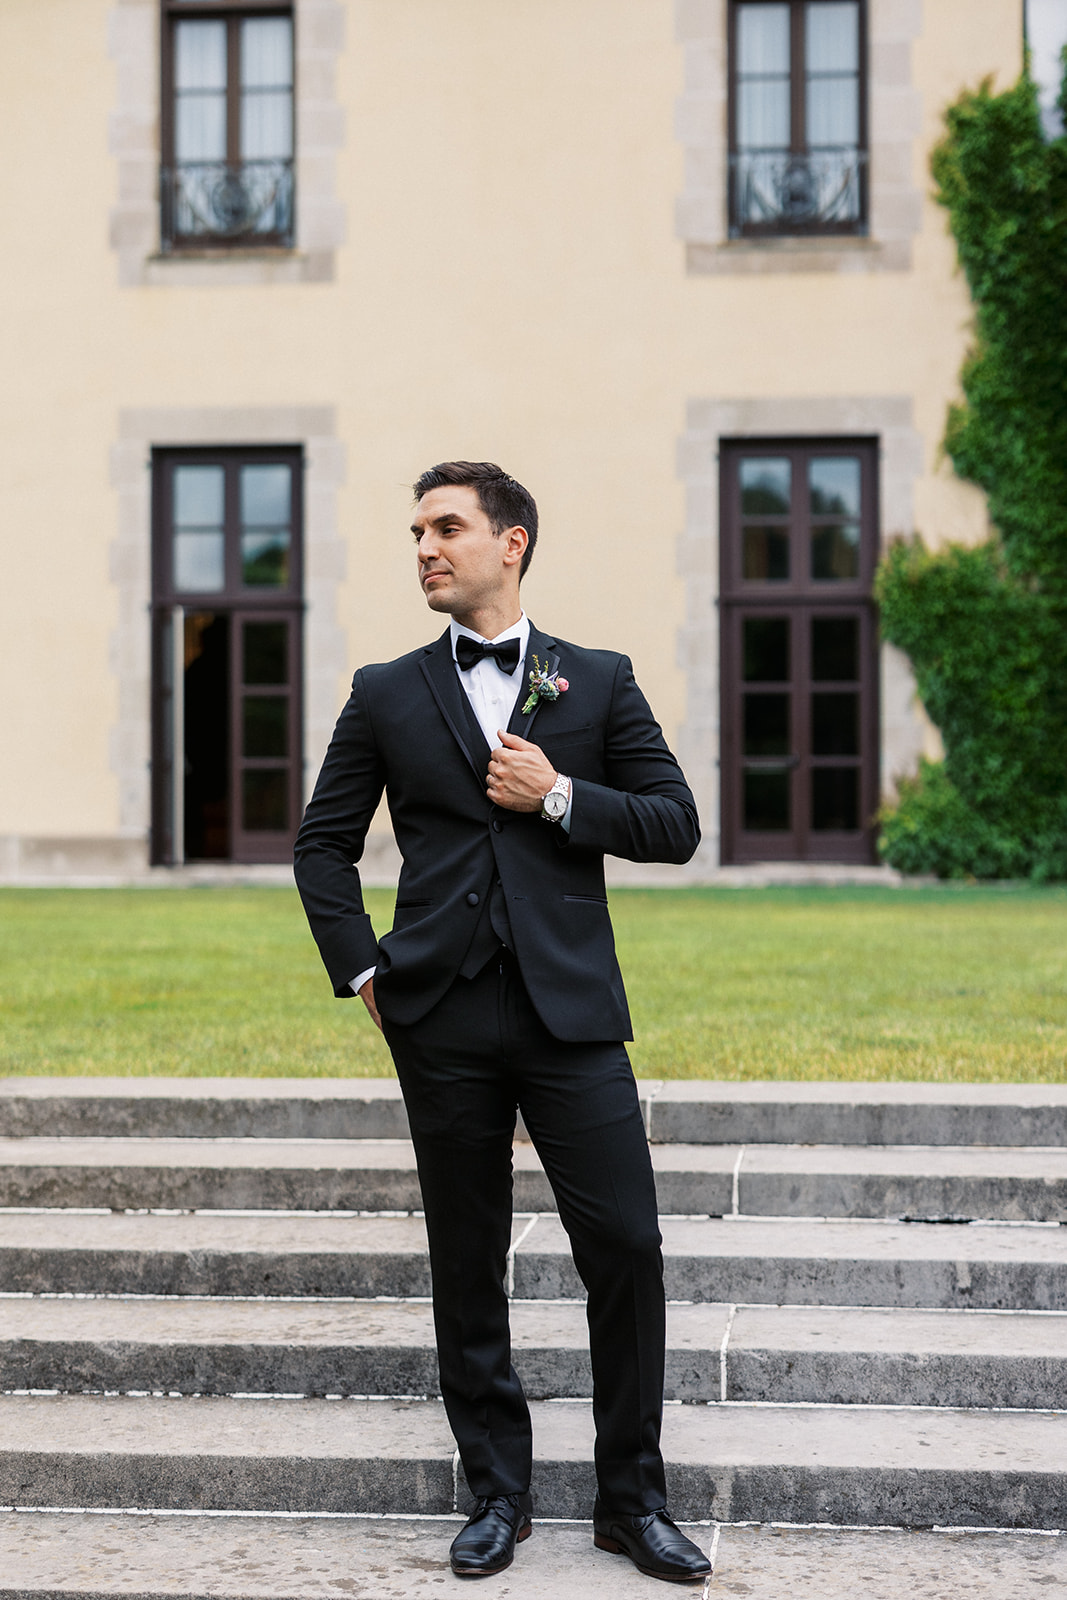 A groom in a black tuxedo holds his lapel while standing on garden steps